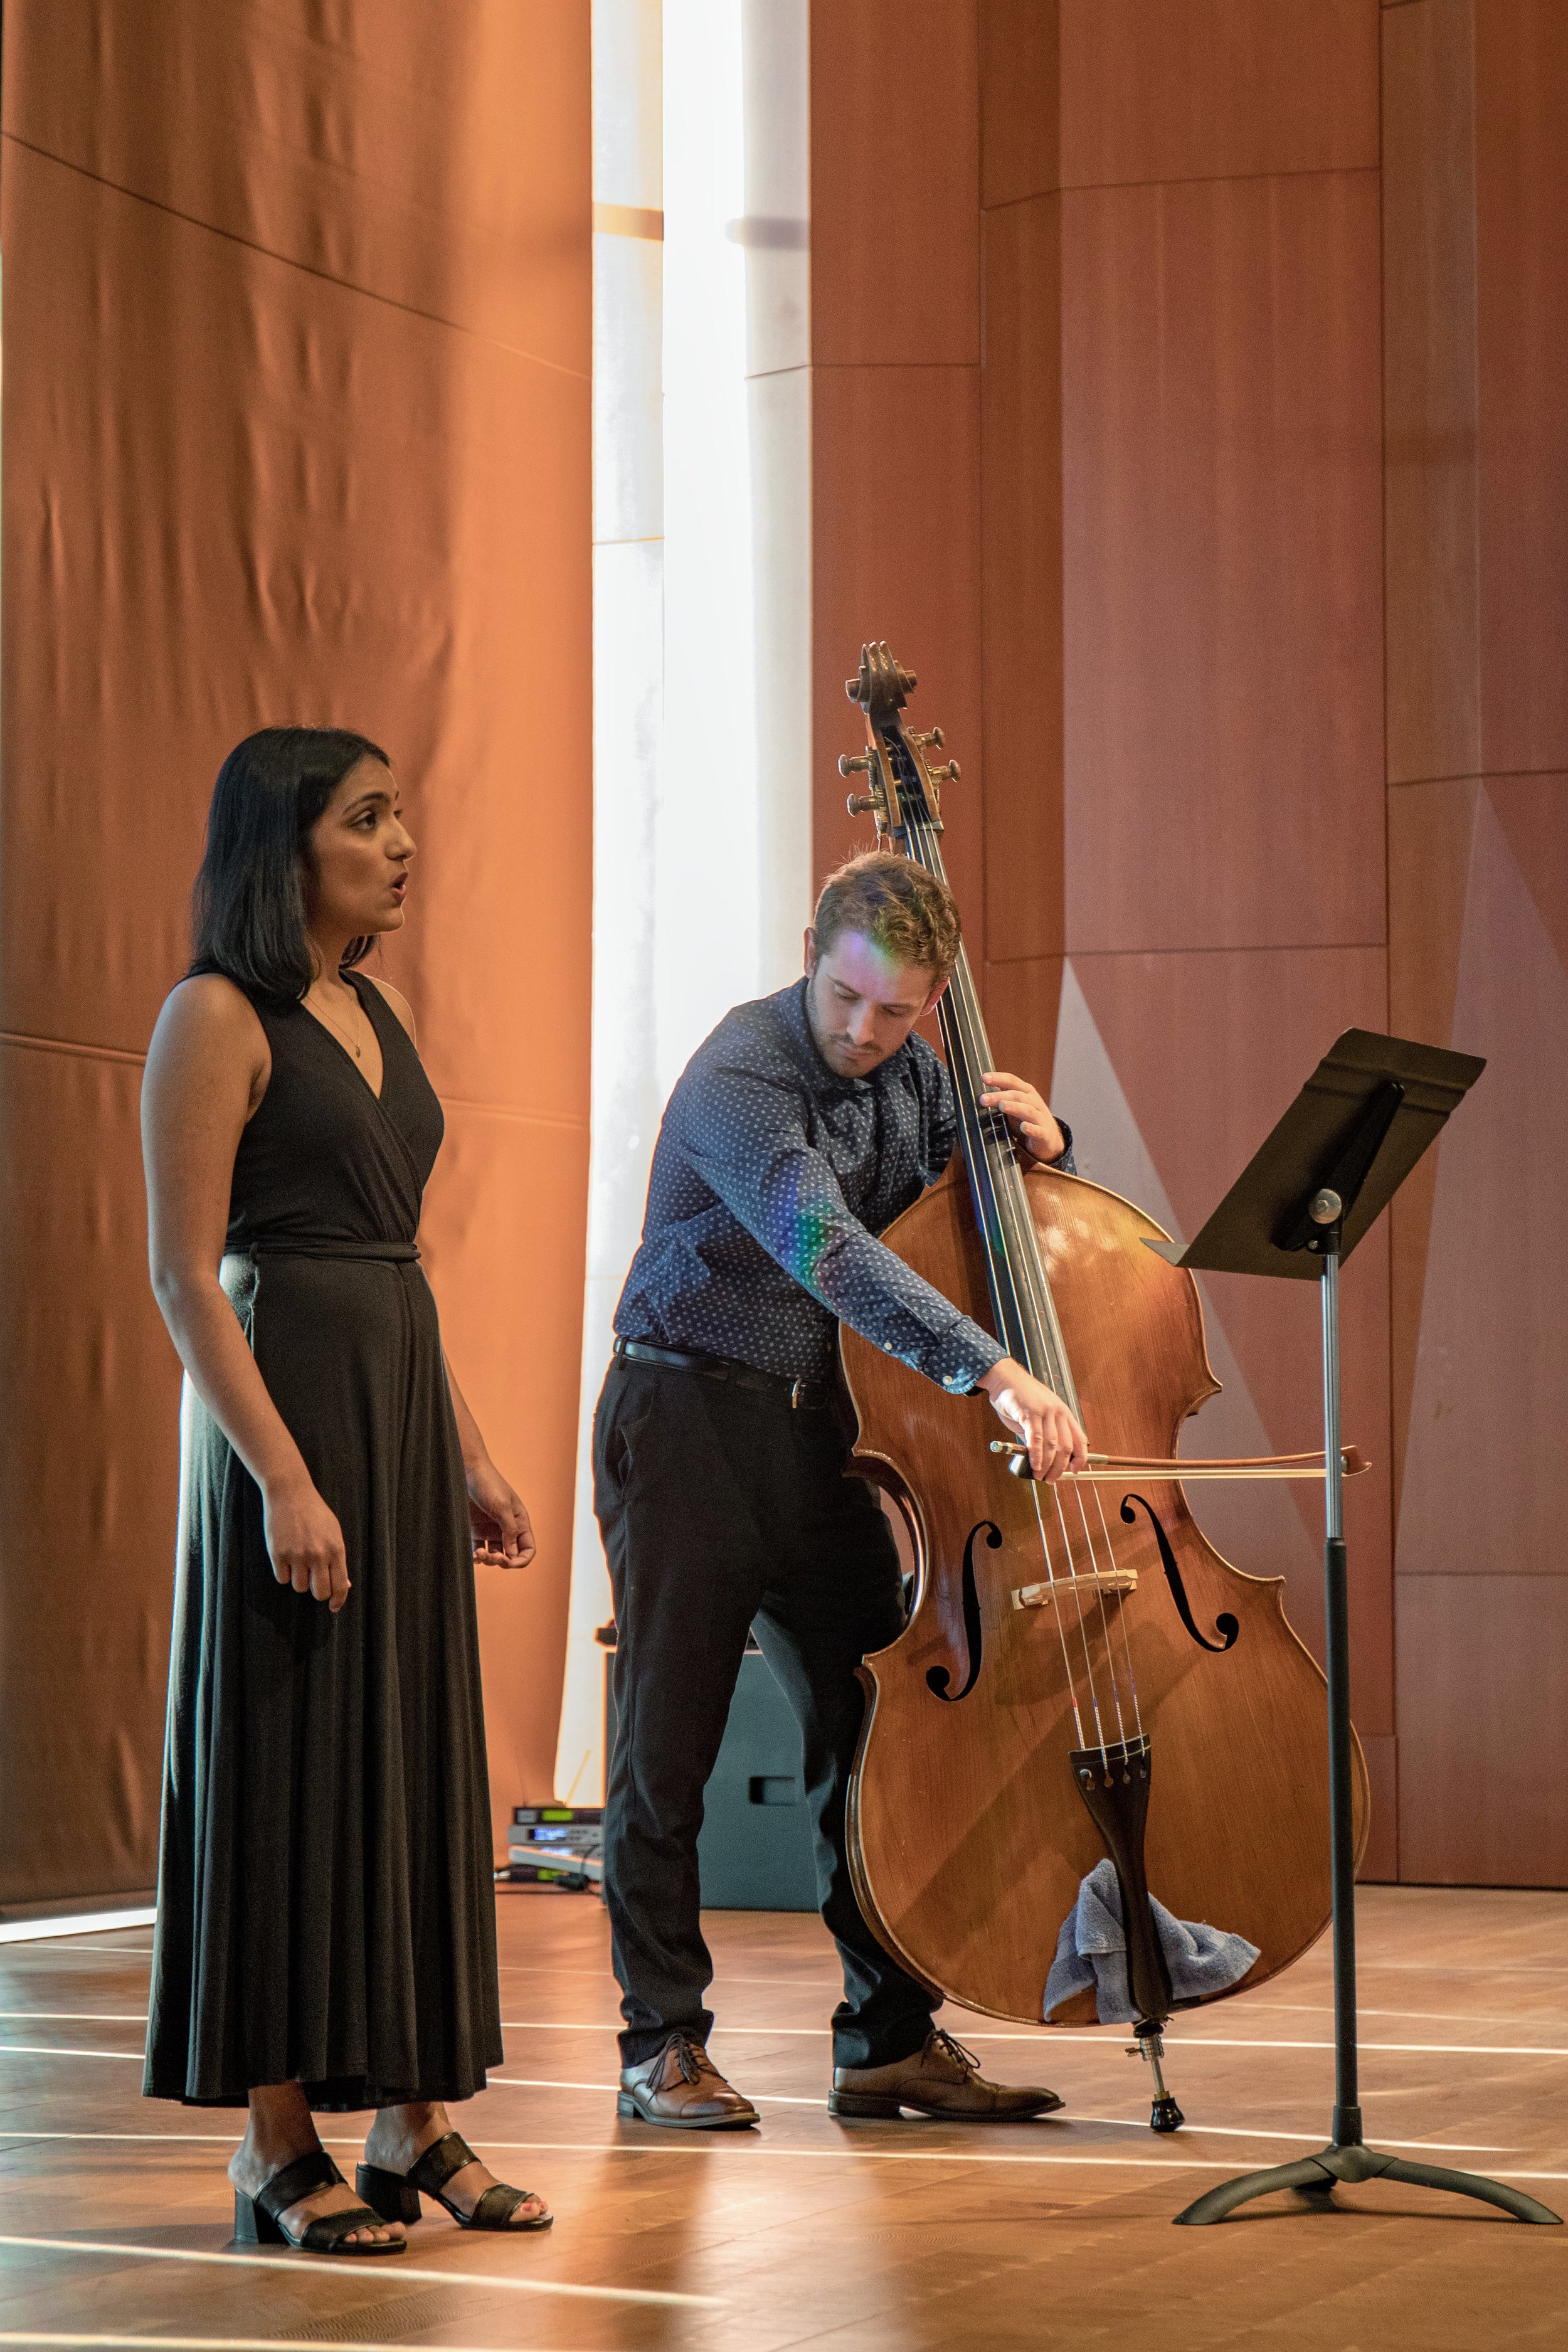  Nivi Ravi and Ryan Cohen, first year medical students perform 'In Paradisum' and 'Swing Low Sweet Chariot,' for the audience and as a tribute to the individuals that donated their bodies for science. As Professor Bernd stated in her opening remarks 